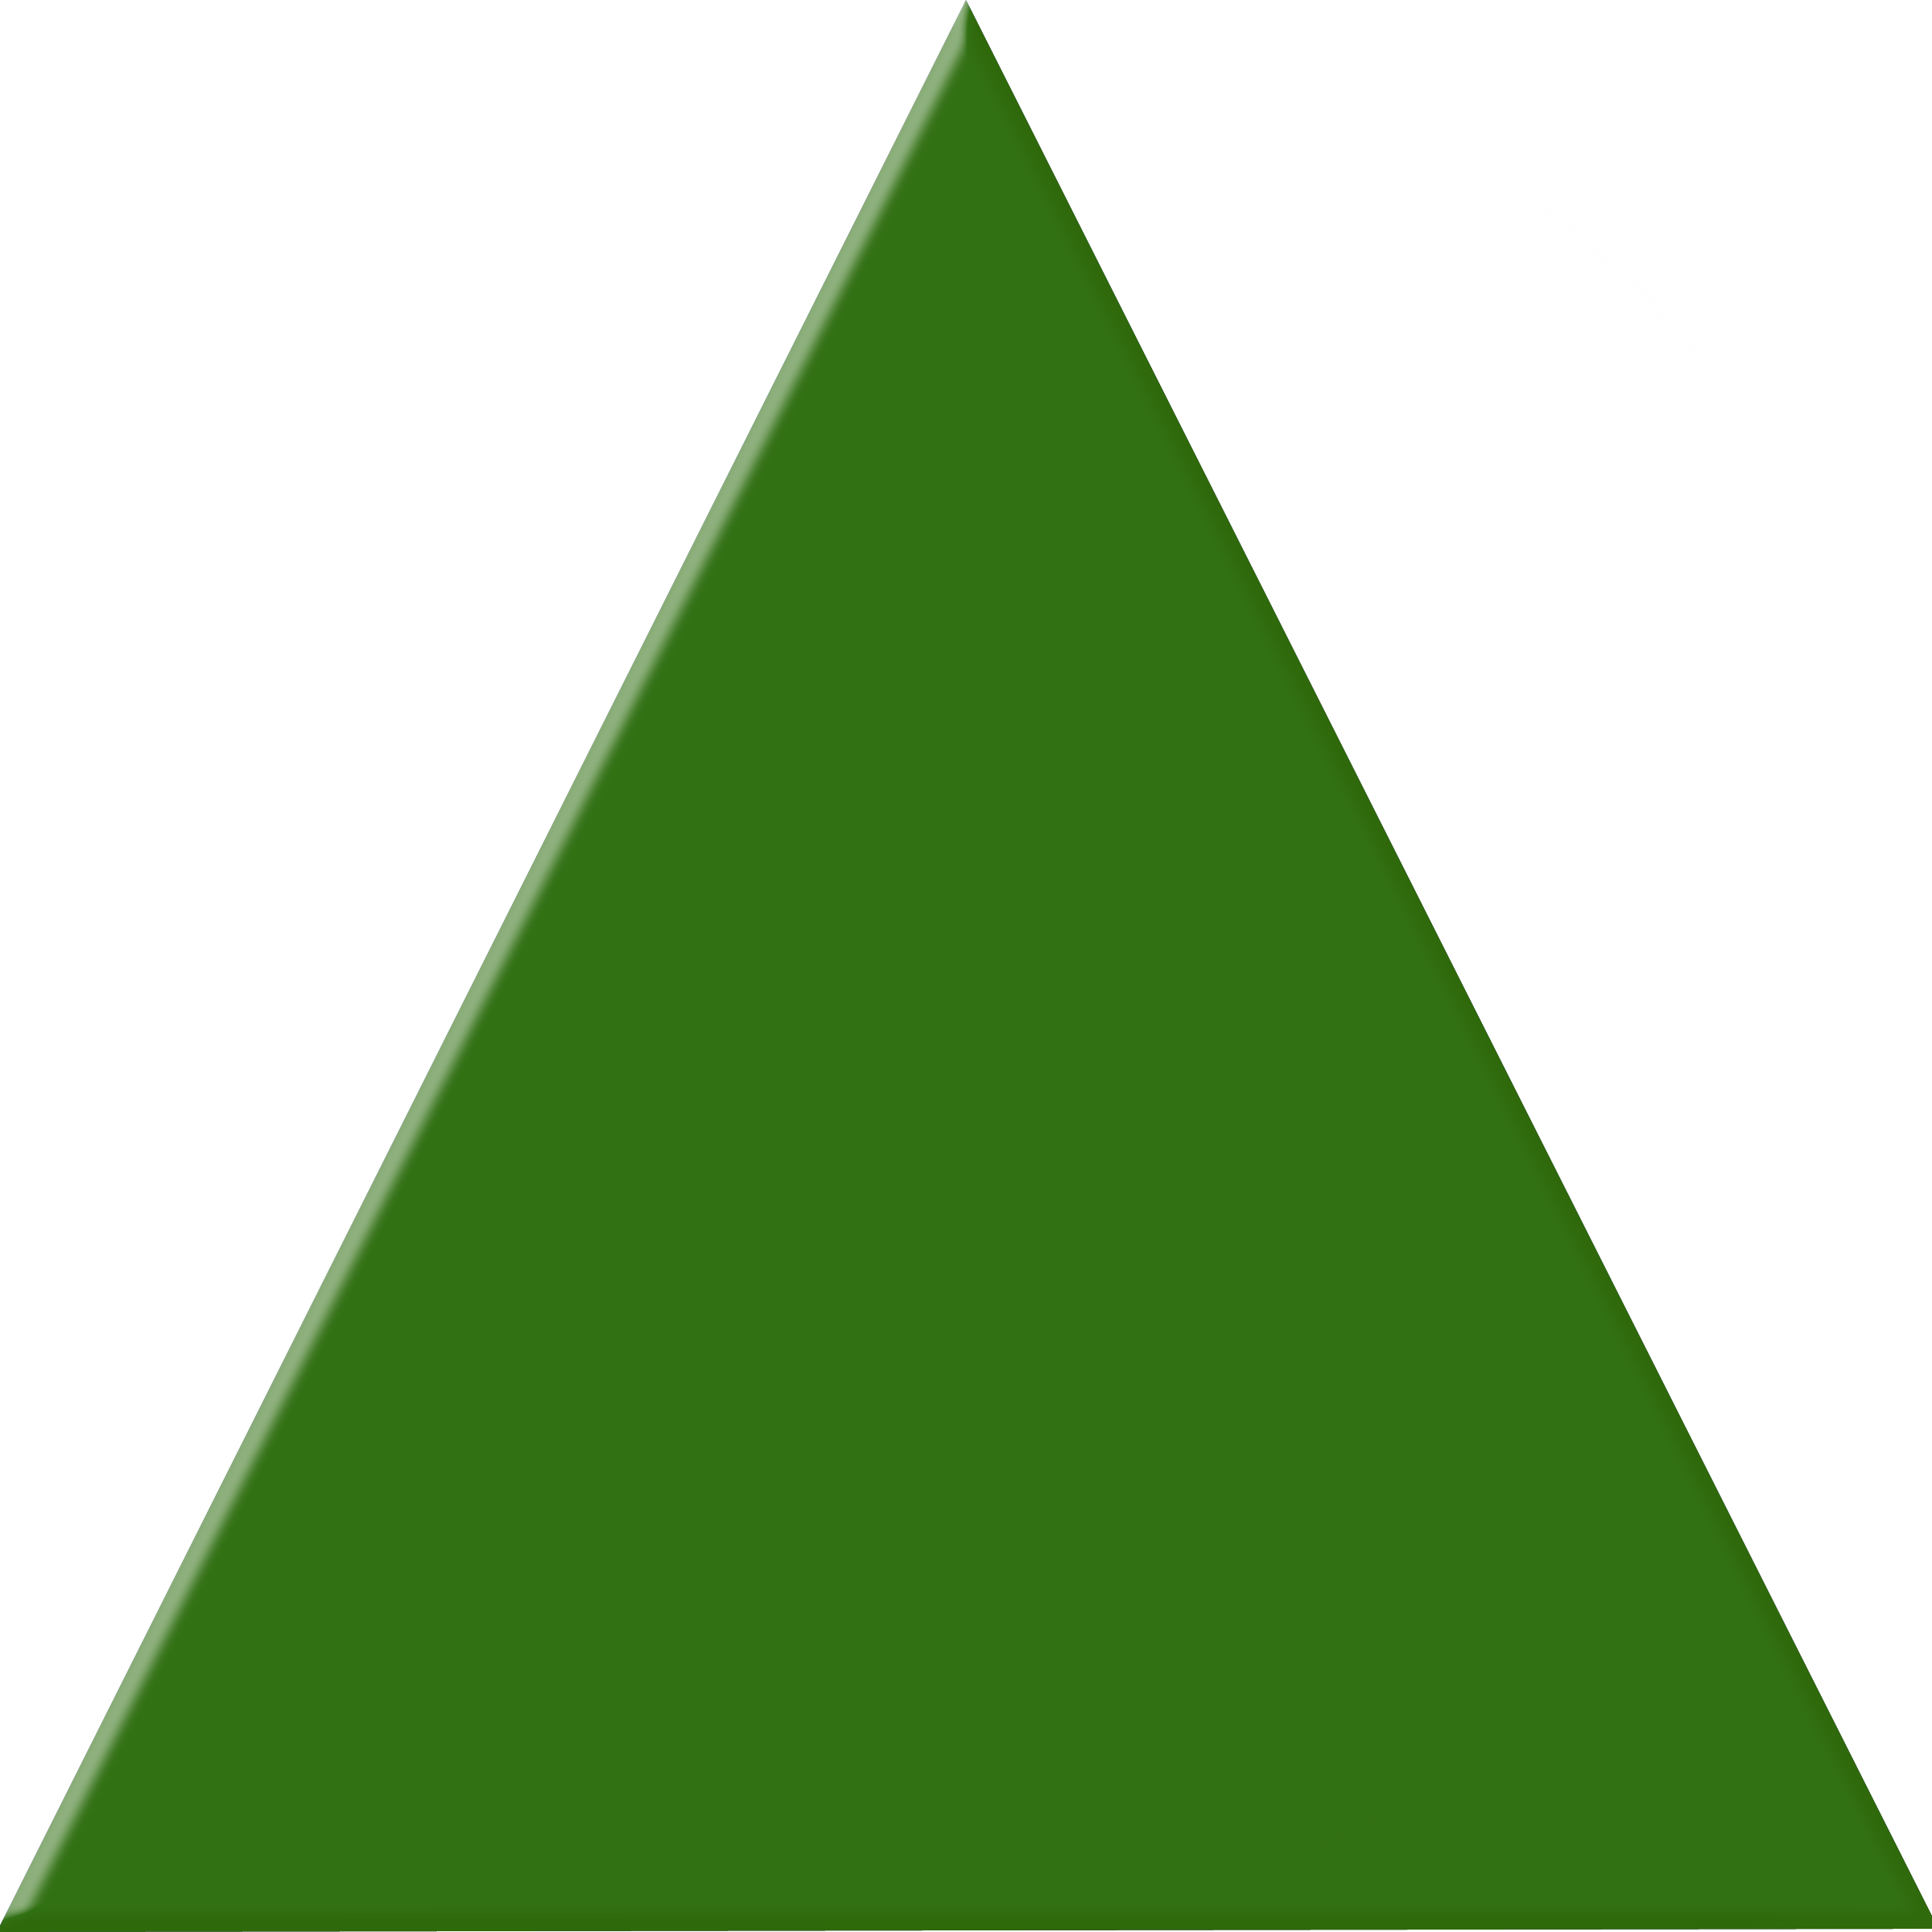 Http - //www - Clker - Com/cliparts - Triangle - Green Triangle Clipart (2400x2400)